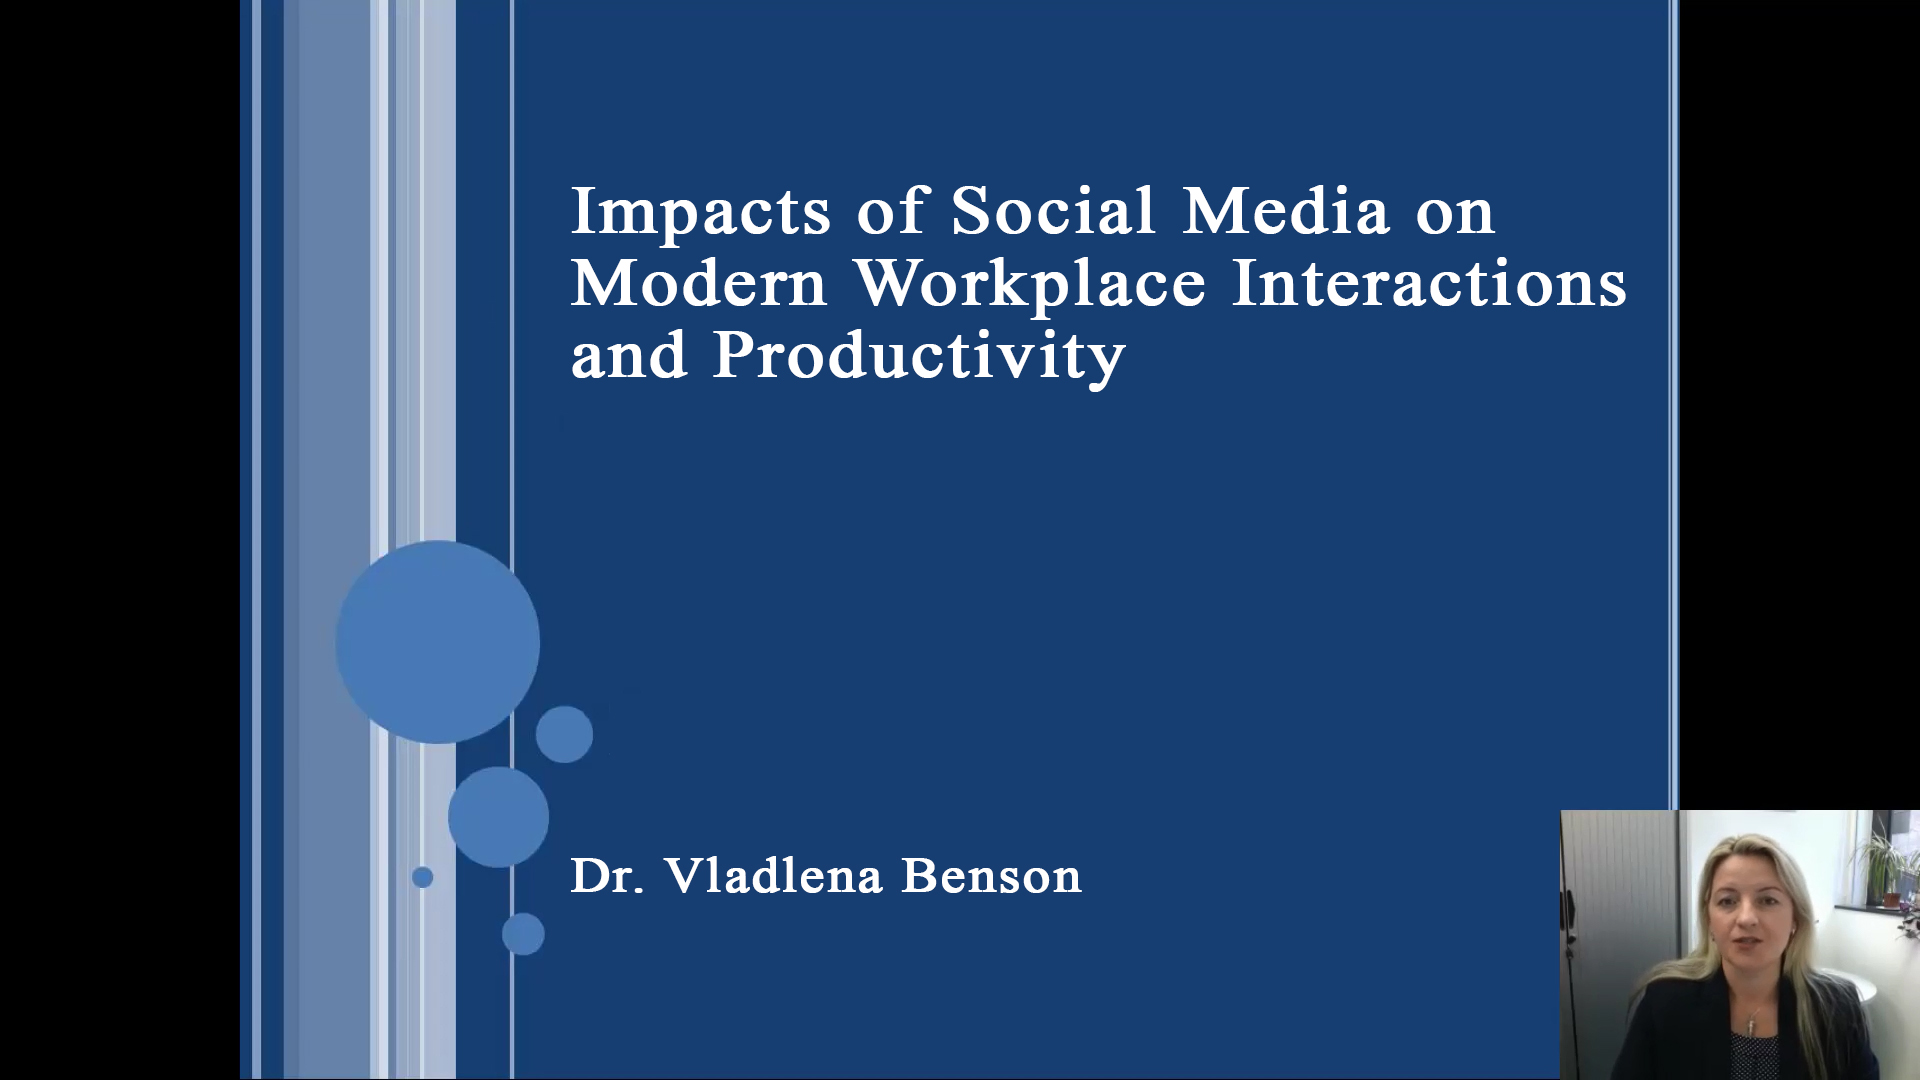 Impacts of Social Media on Modern Workplace Interactions and Productivity